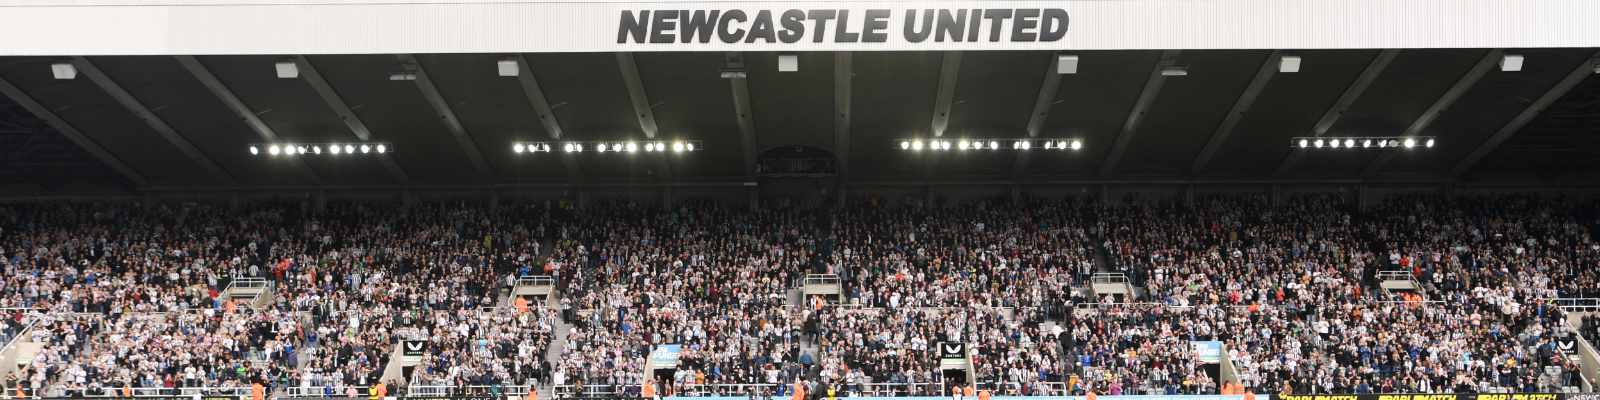 Stadion von Newcastle United (photo by Stu Forster / GettyImages)